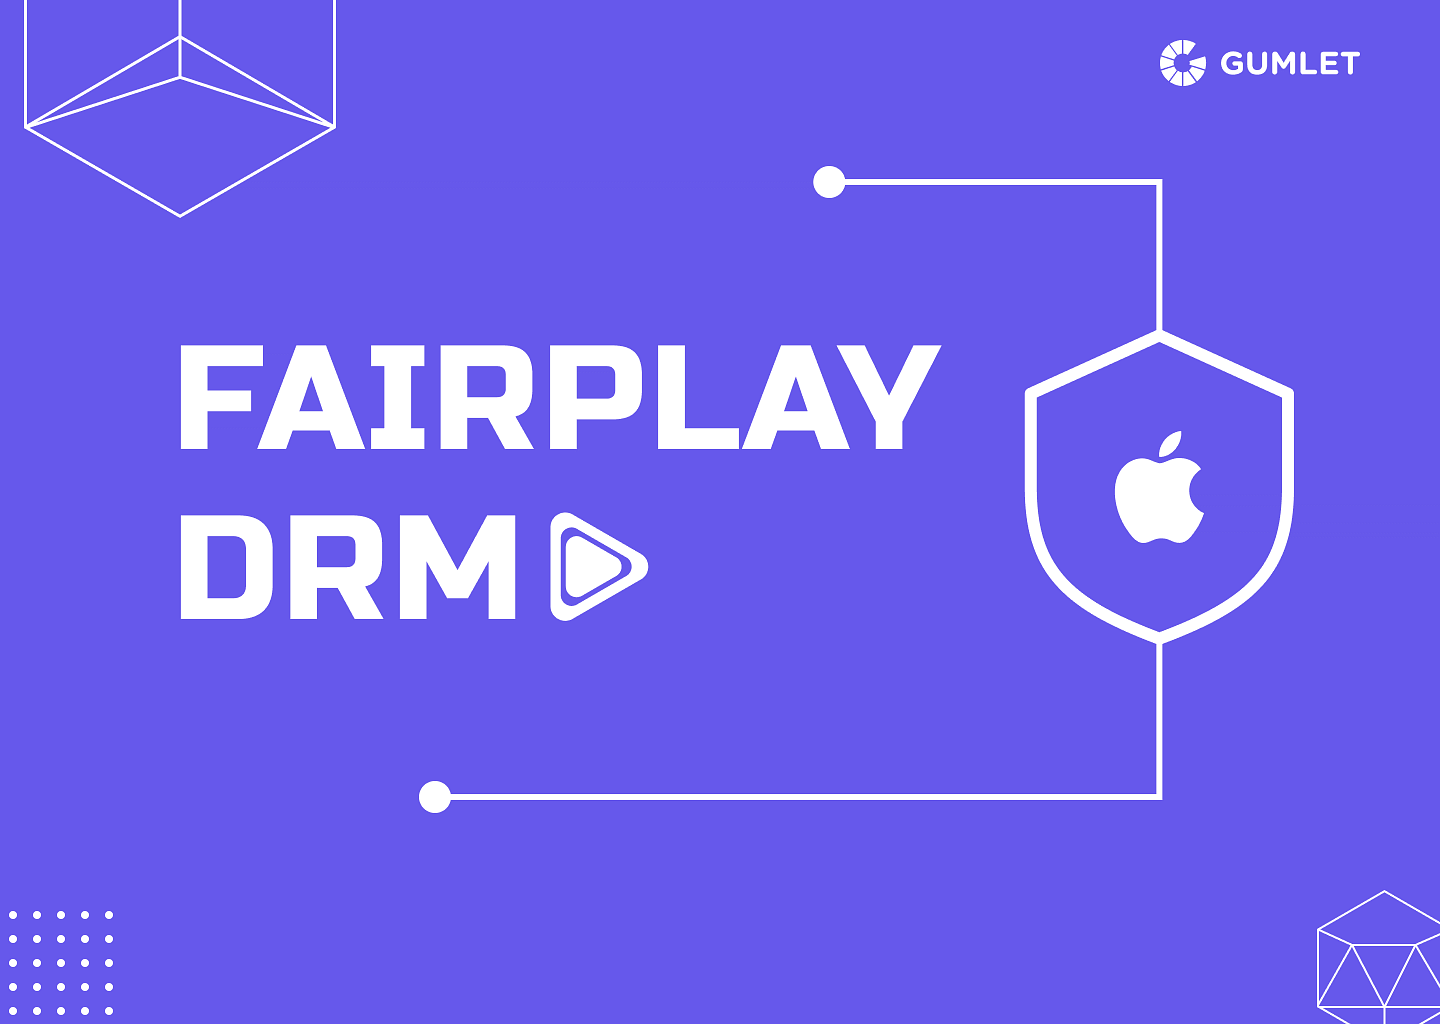 Guide On Apple's Fairplay DRM